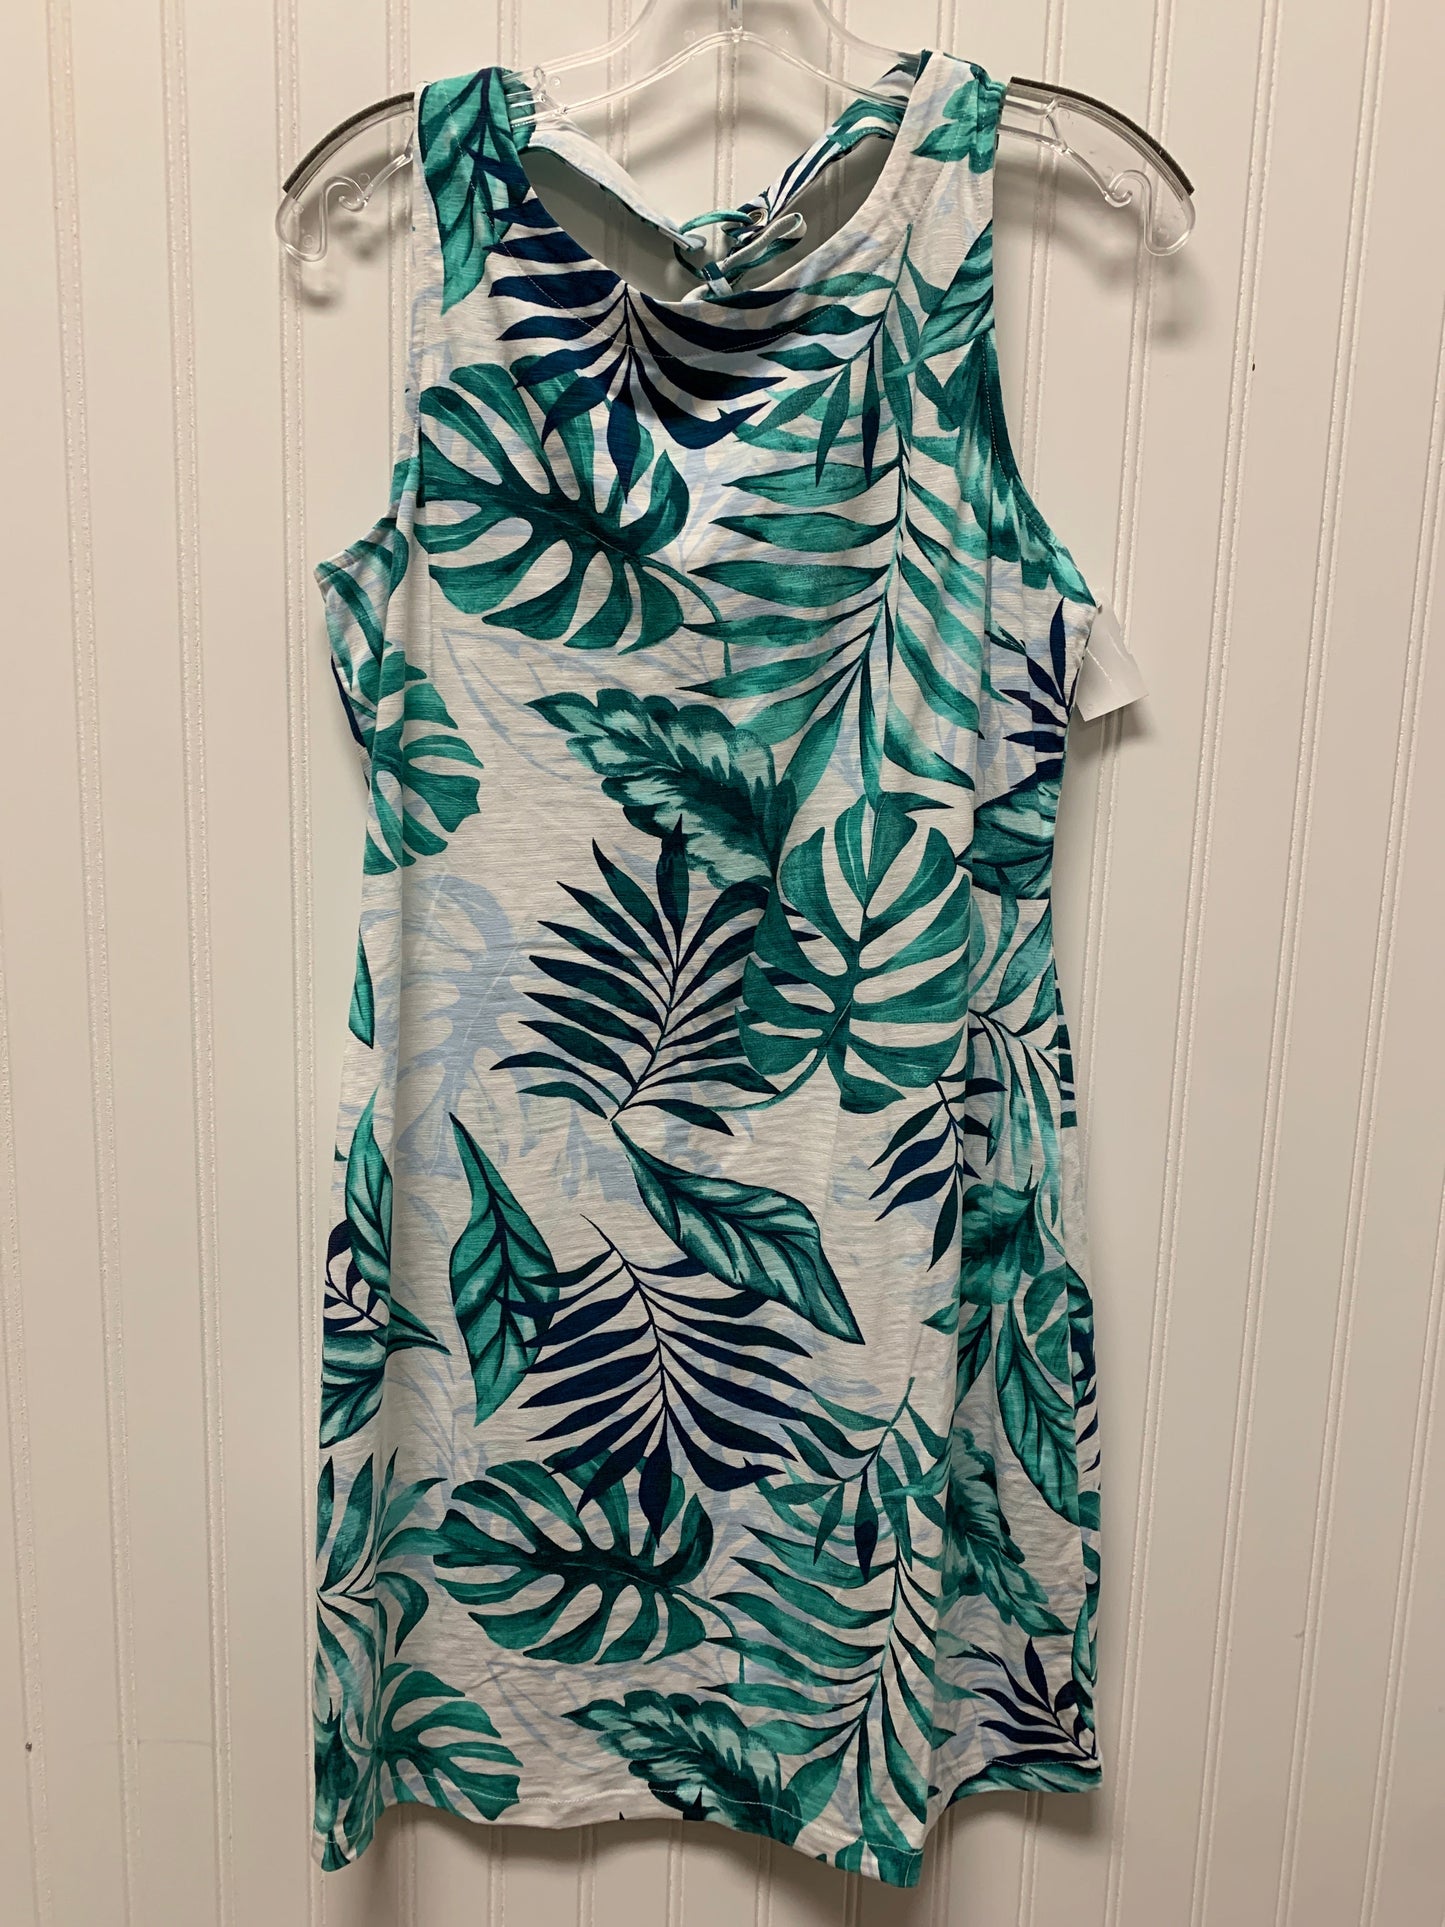 Blue & Green Dress Casual Short Tommy Bahama, Size Petite   S